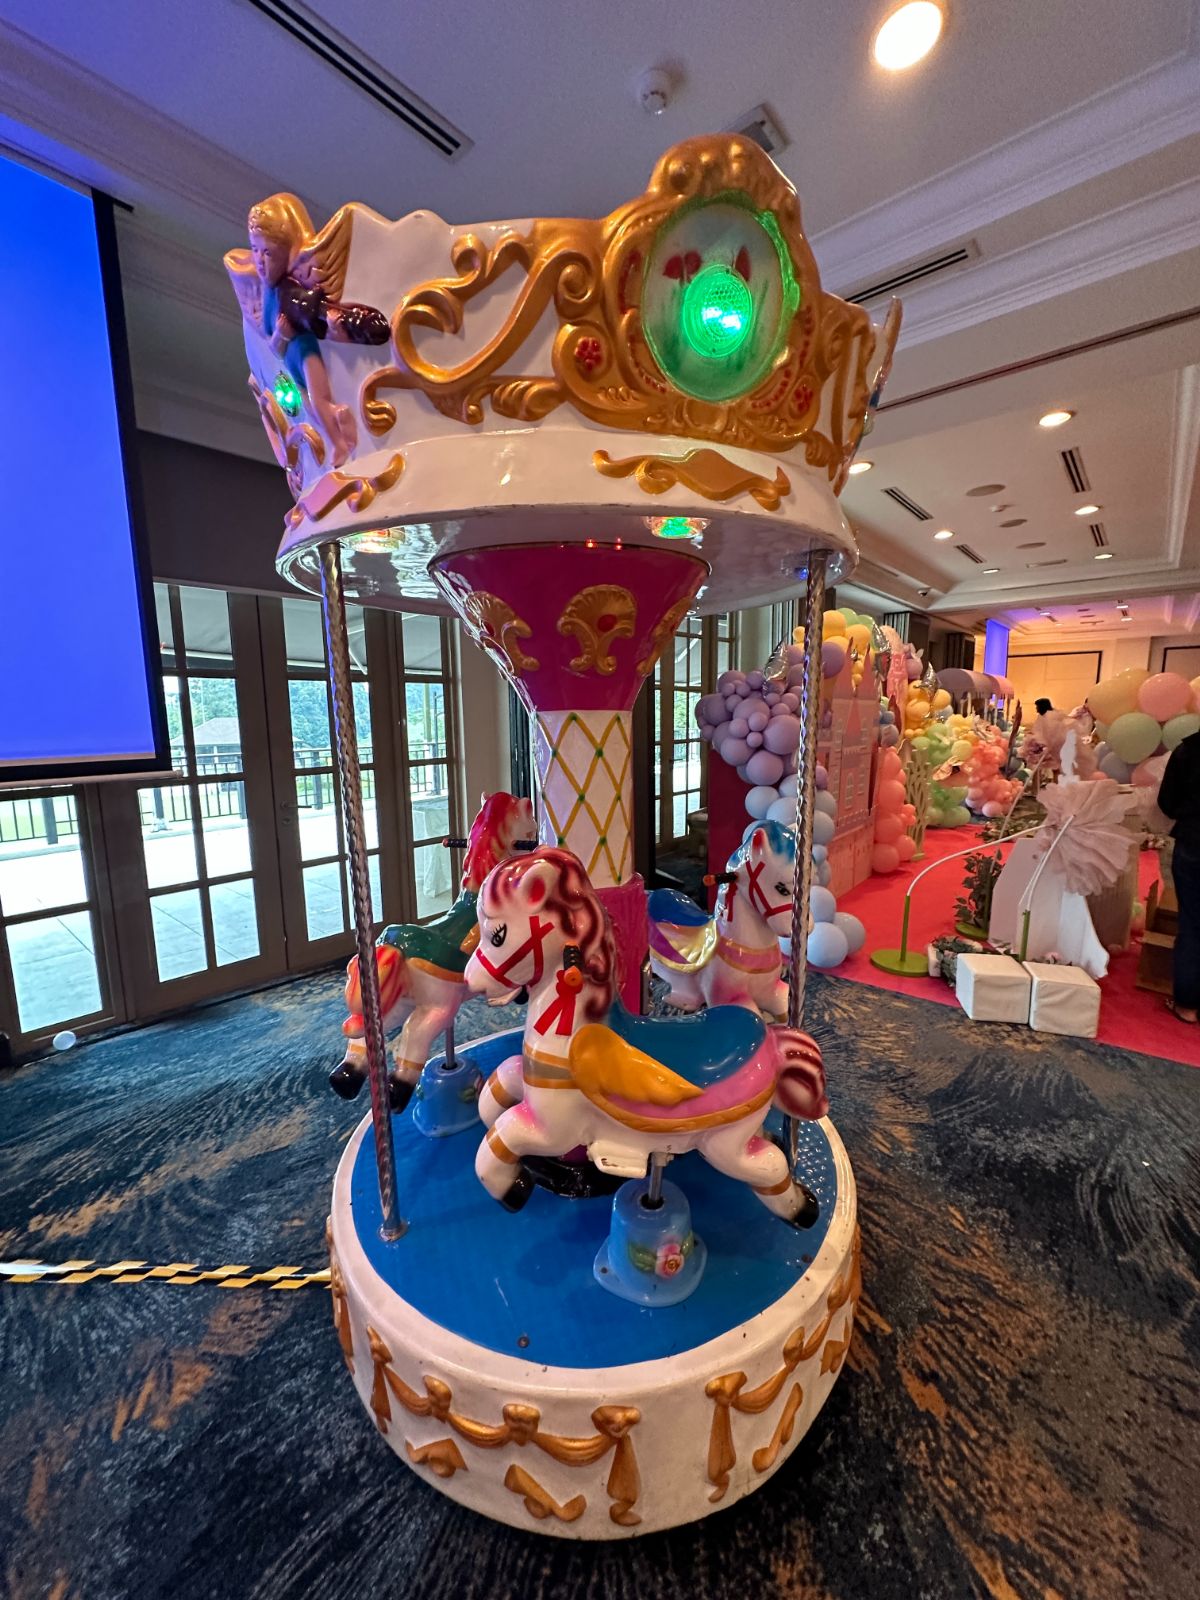 🎉 Thank you for the customer's support: A birthday celebration that's as cute as a 3 SEATS MINI CAROUSEL HORSE